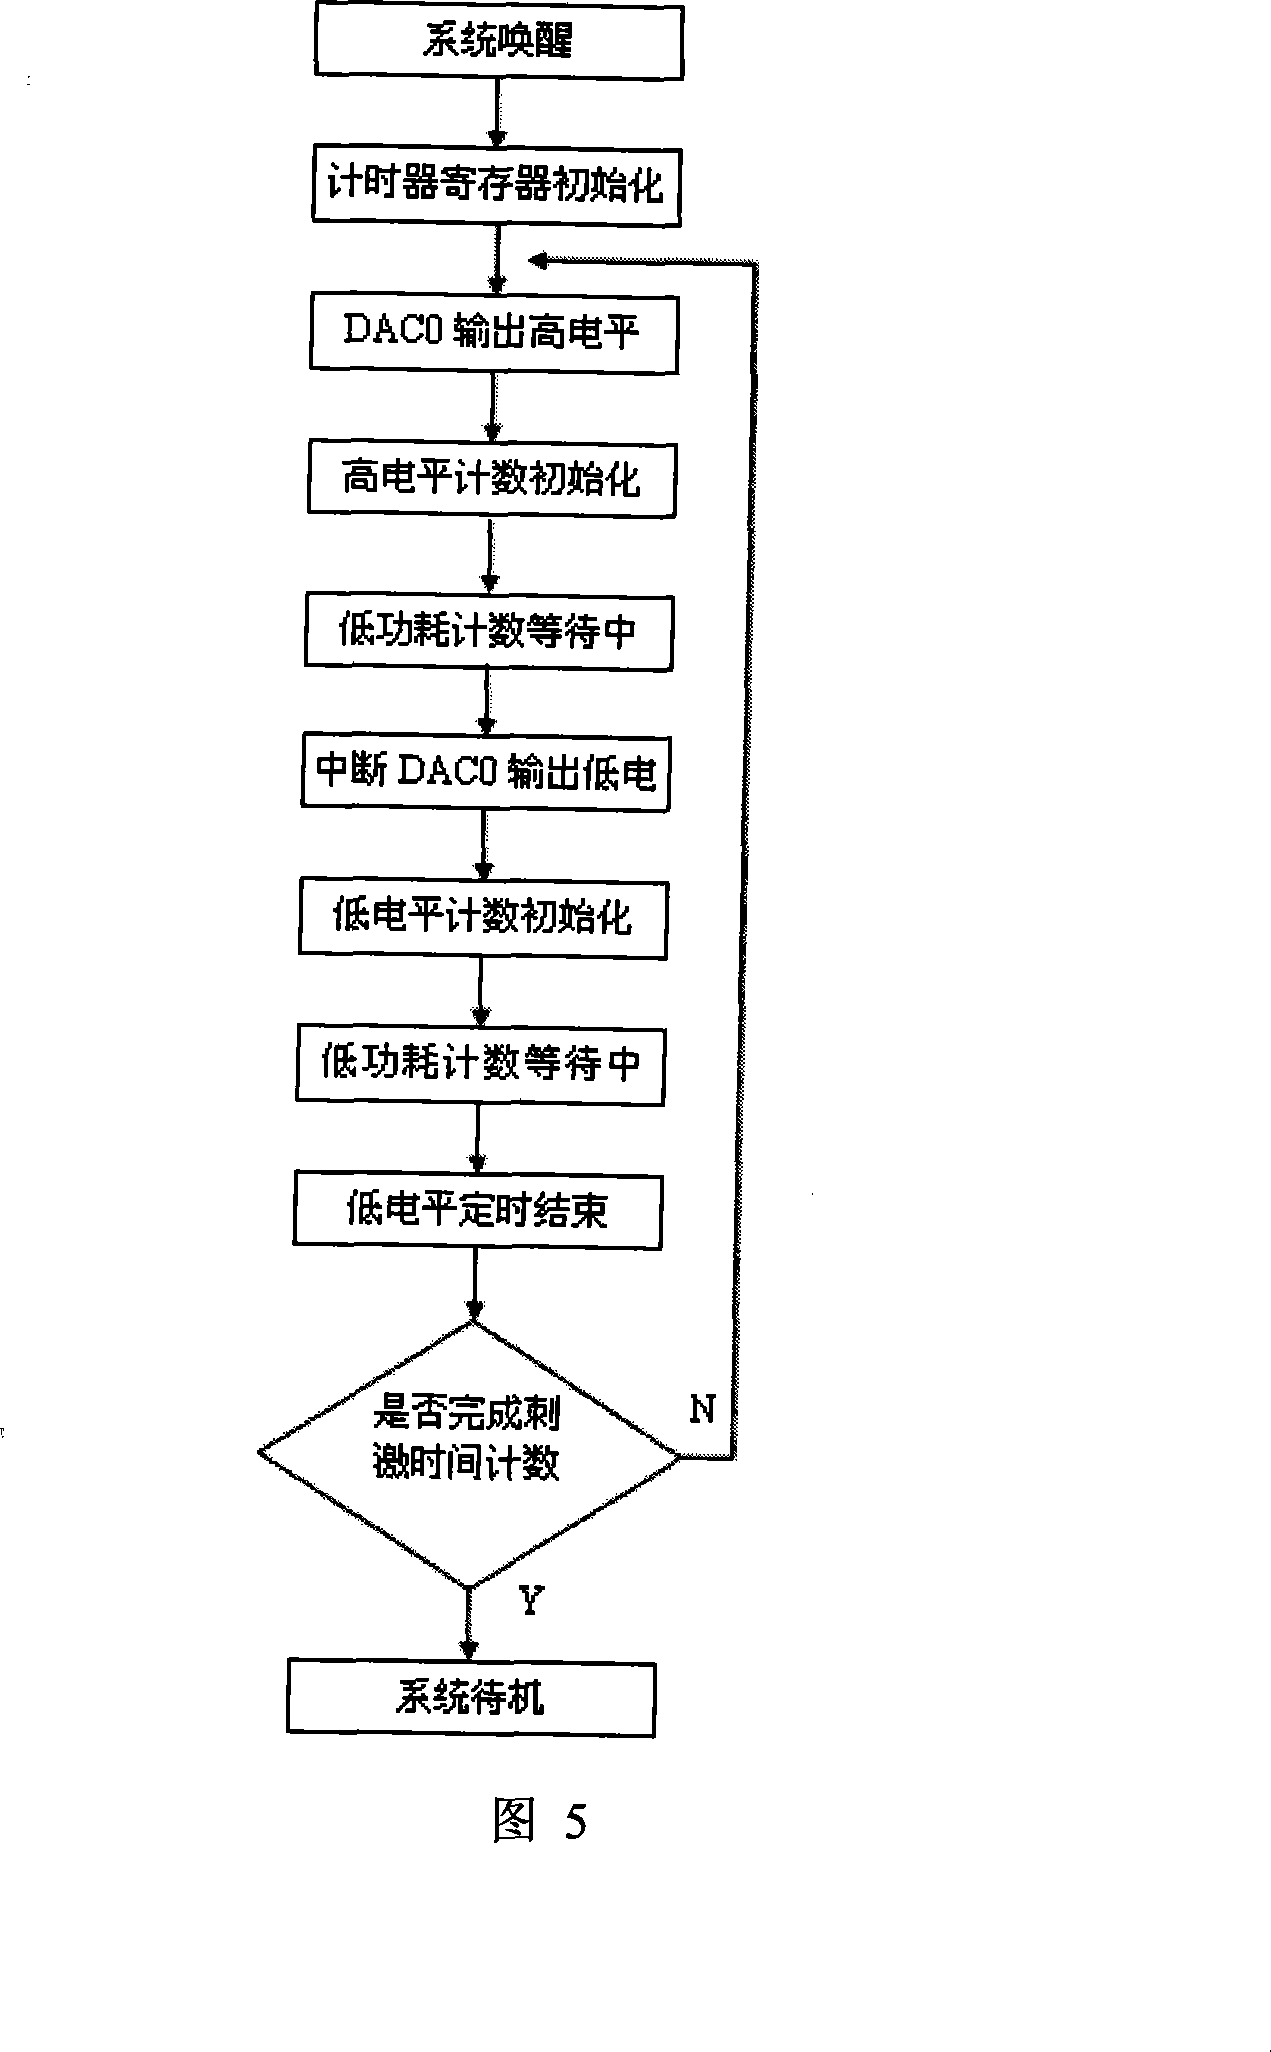 Implantation type wireless limbs sport control nerve stimulation network system and control method